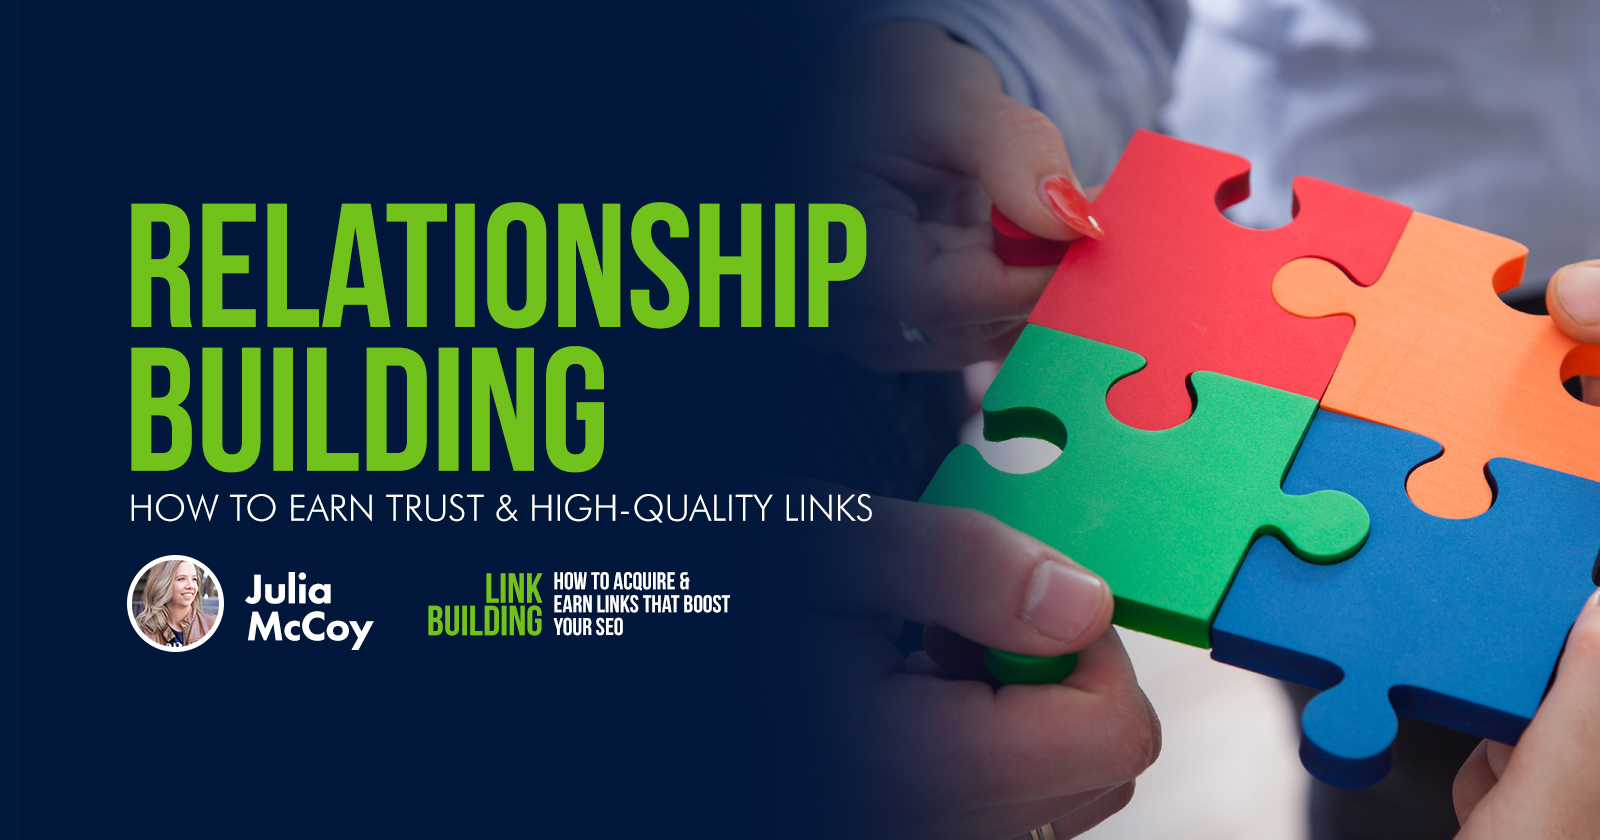 How to build Trust. Building relationships.